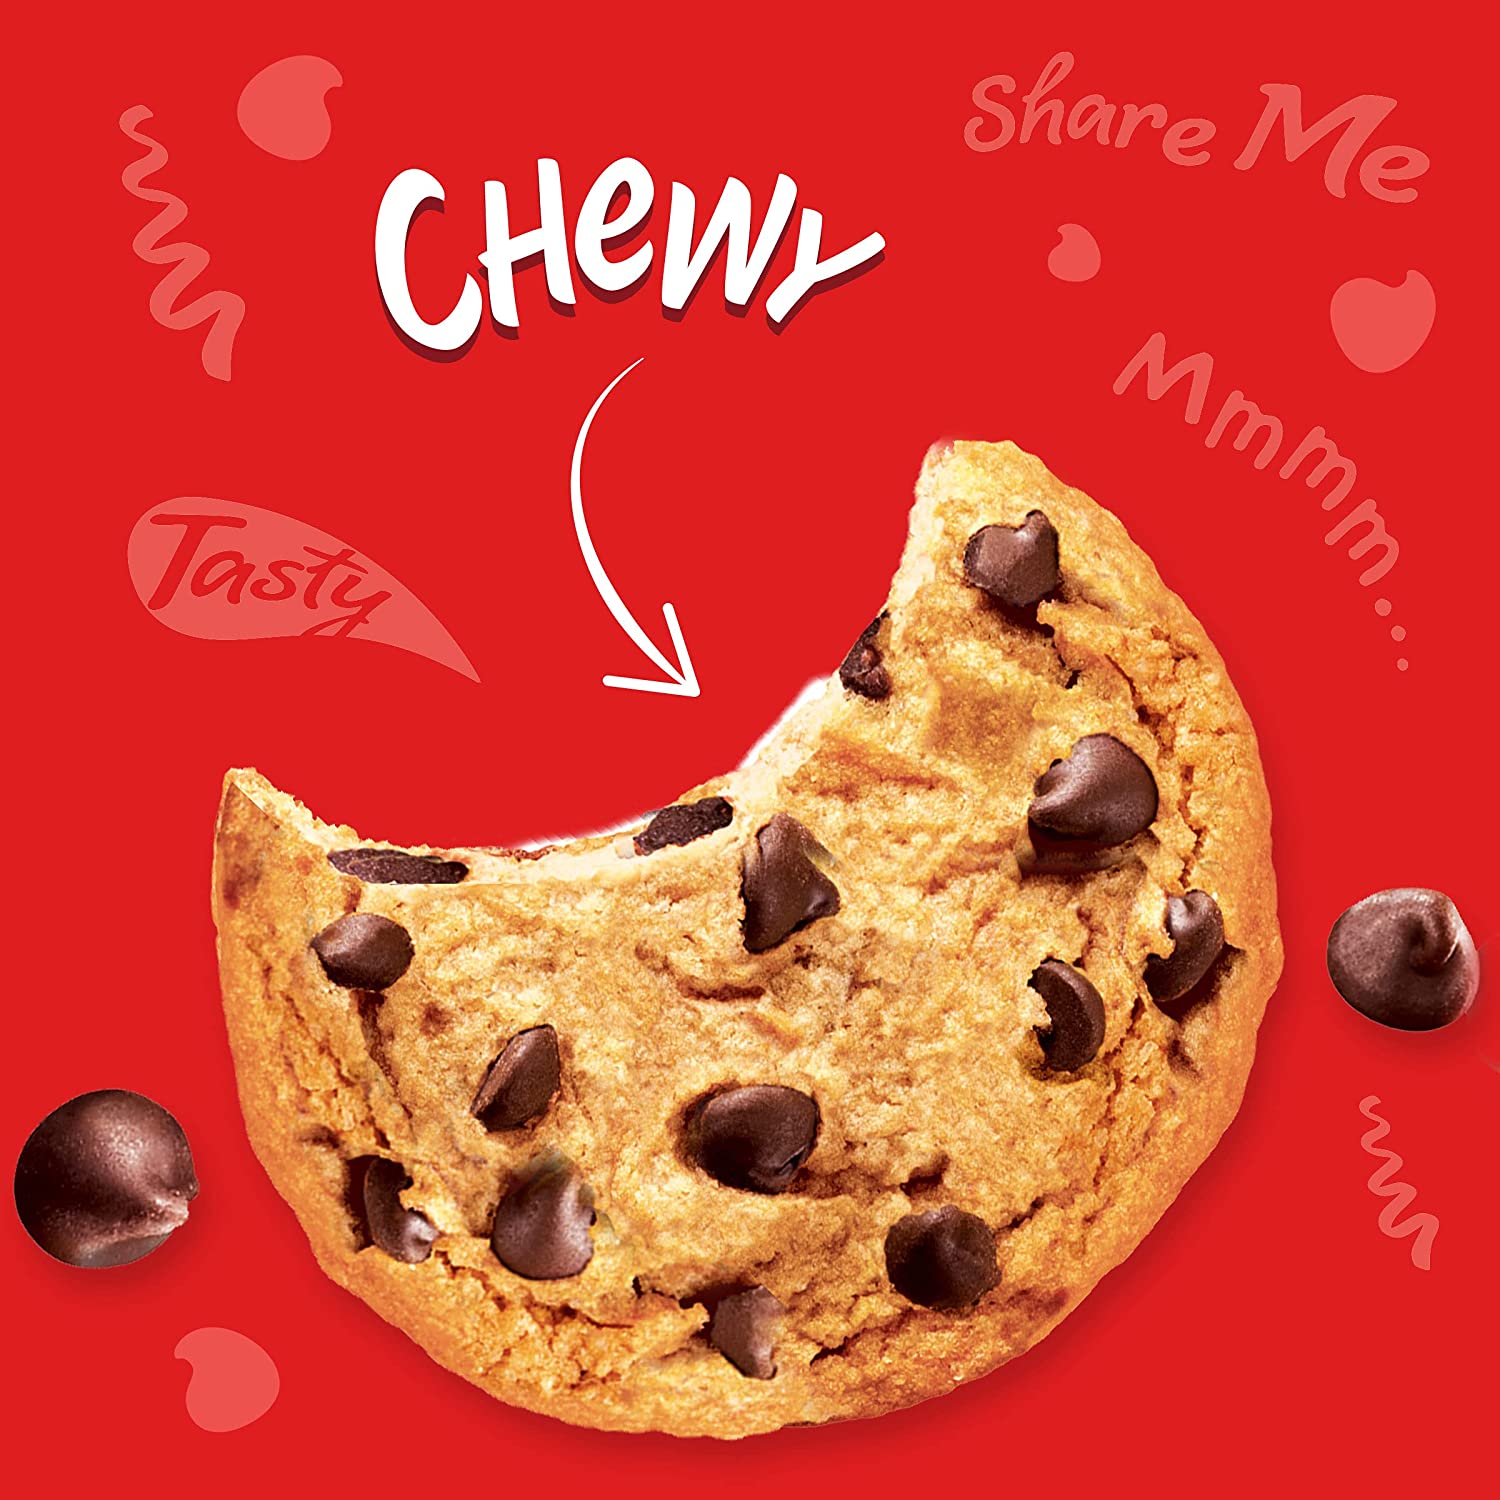 Chips Ahoy! Chewy Cookies - Nabisco (368gm) Nabisco - Chips Ahoy!